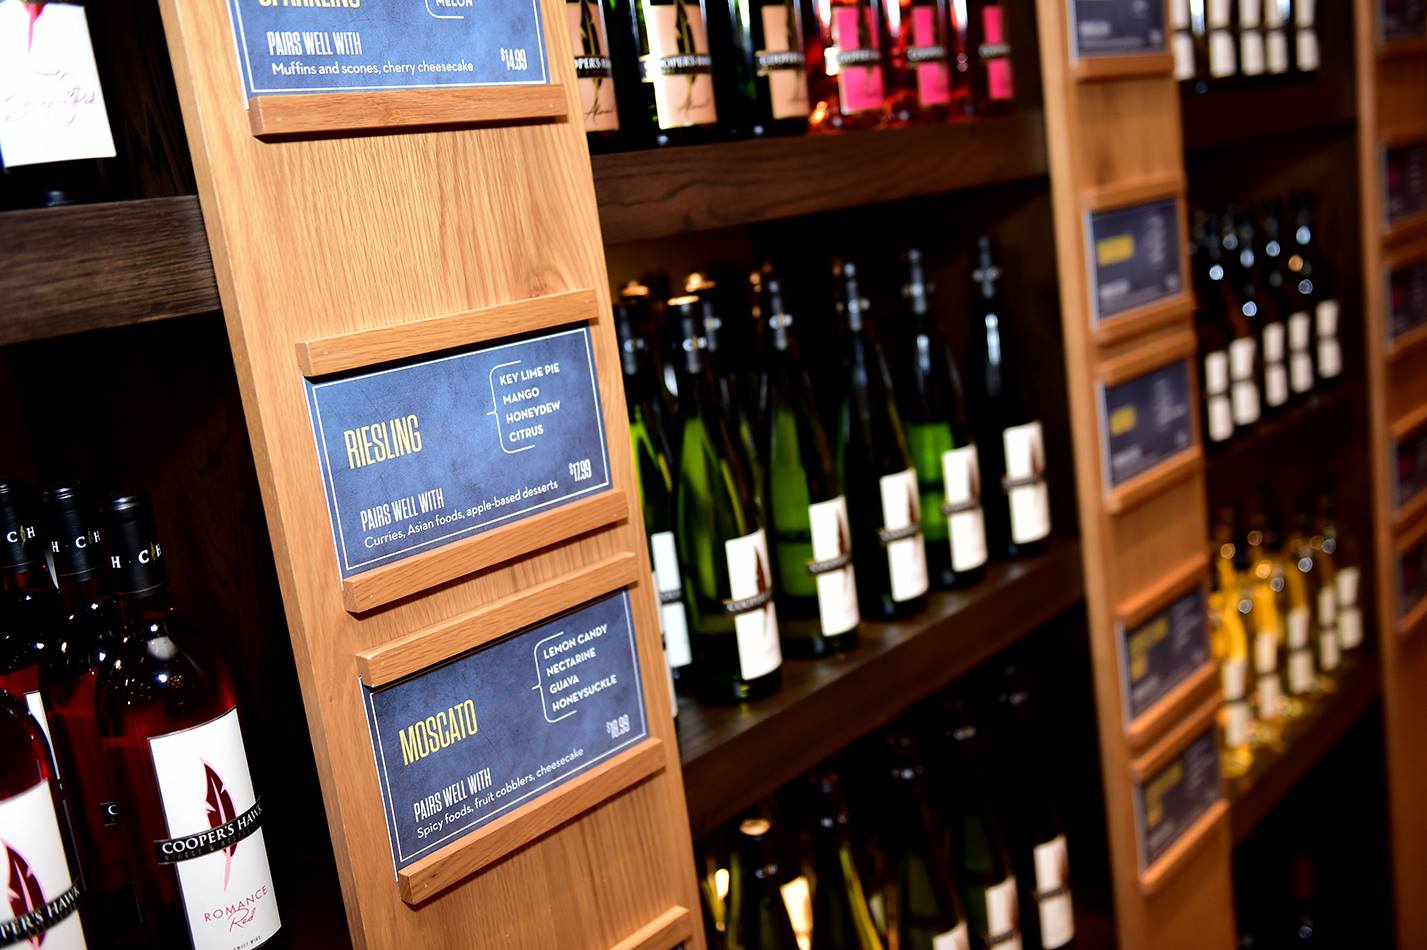 wines that are available for purchase from Cooper's Hawk within the restaurant